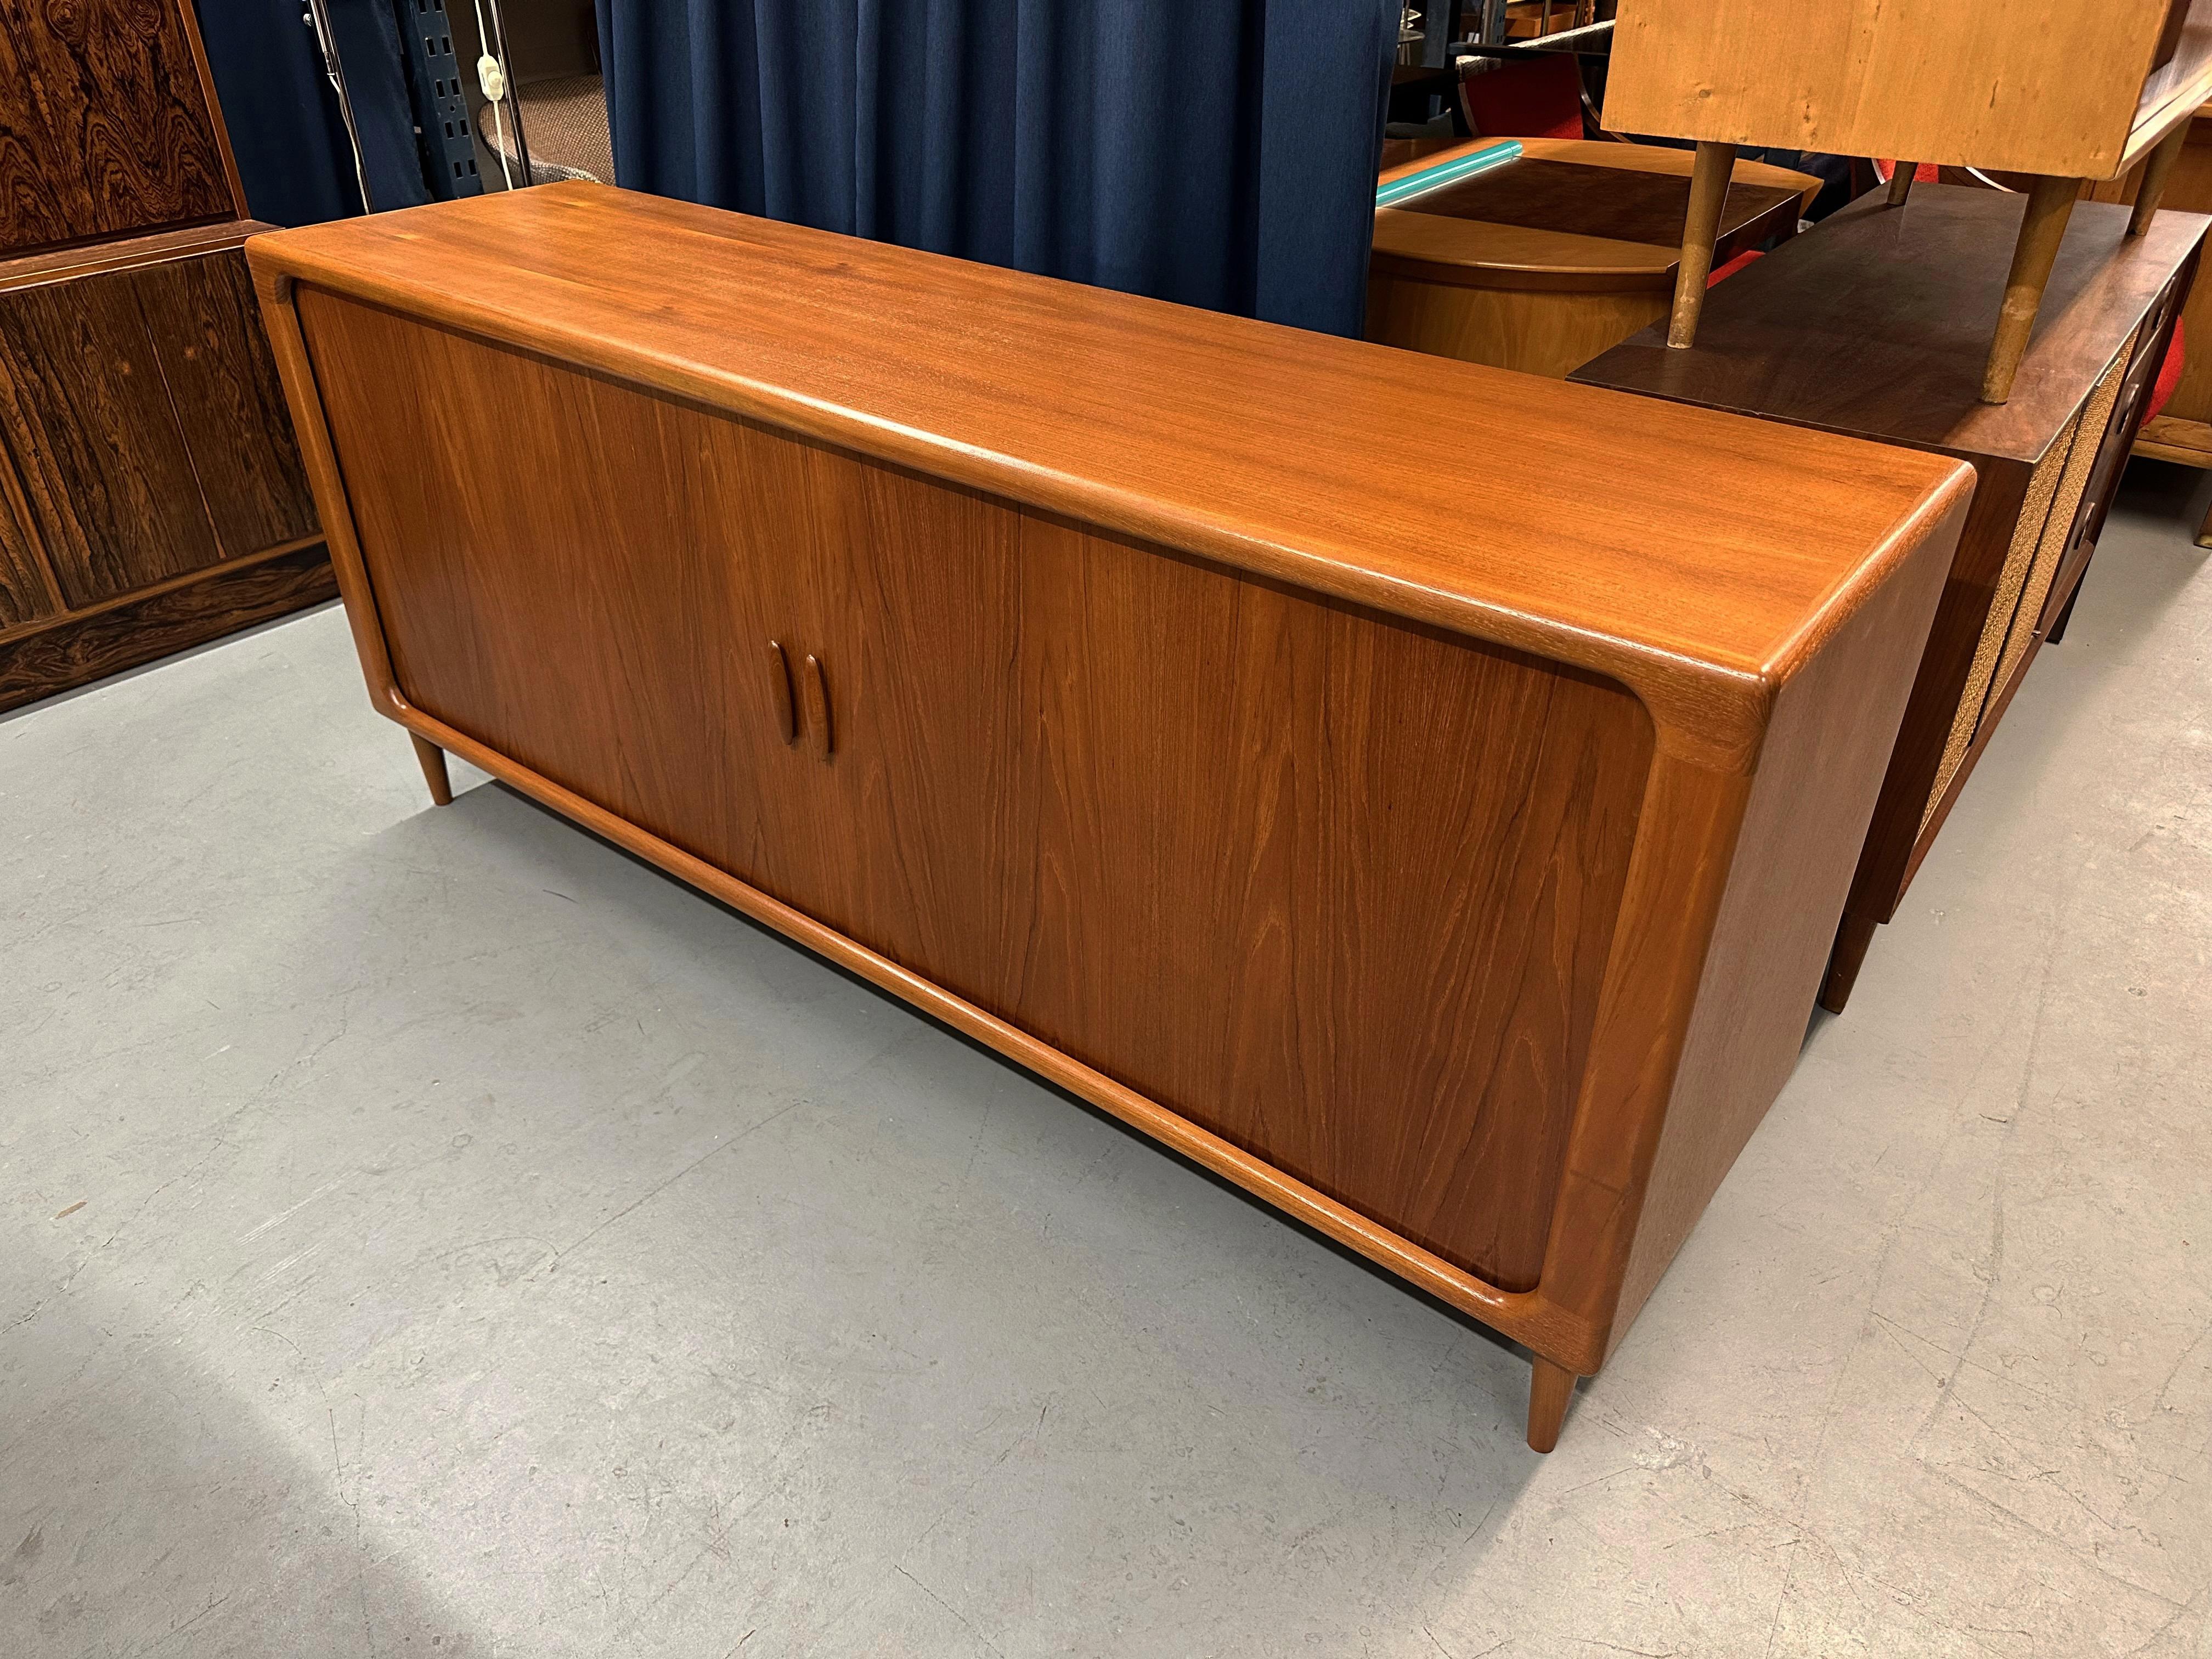 Beautiful 1960's Danish teak credenza by Dyrlund with the most impressive tambour doors we think we've ever seen.

The interior has 3 adjustable shelves and 5 drawers with dovetail joints.

Felt lined top drawer for silver storage.

In excellent